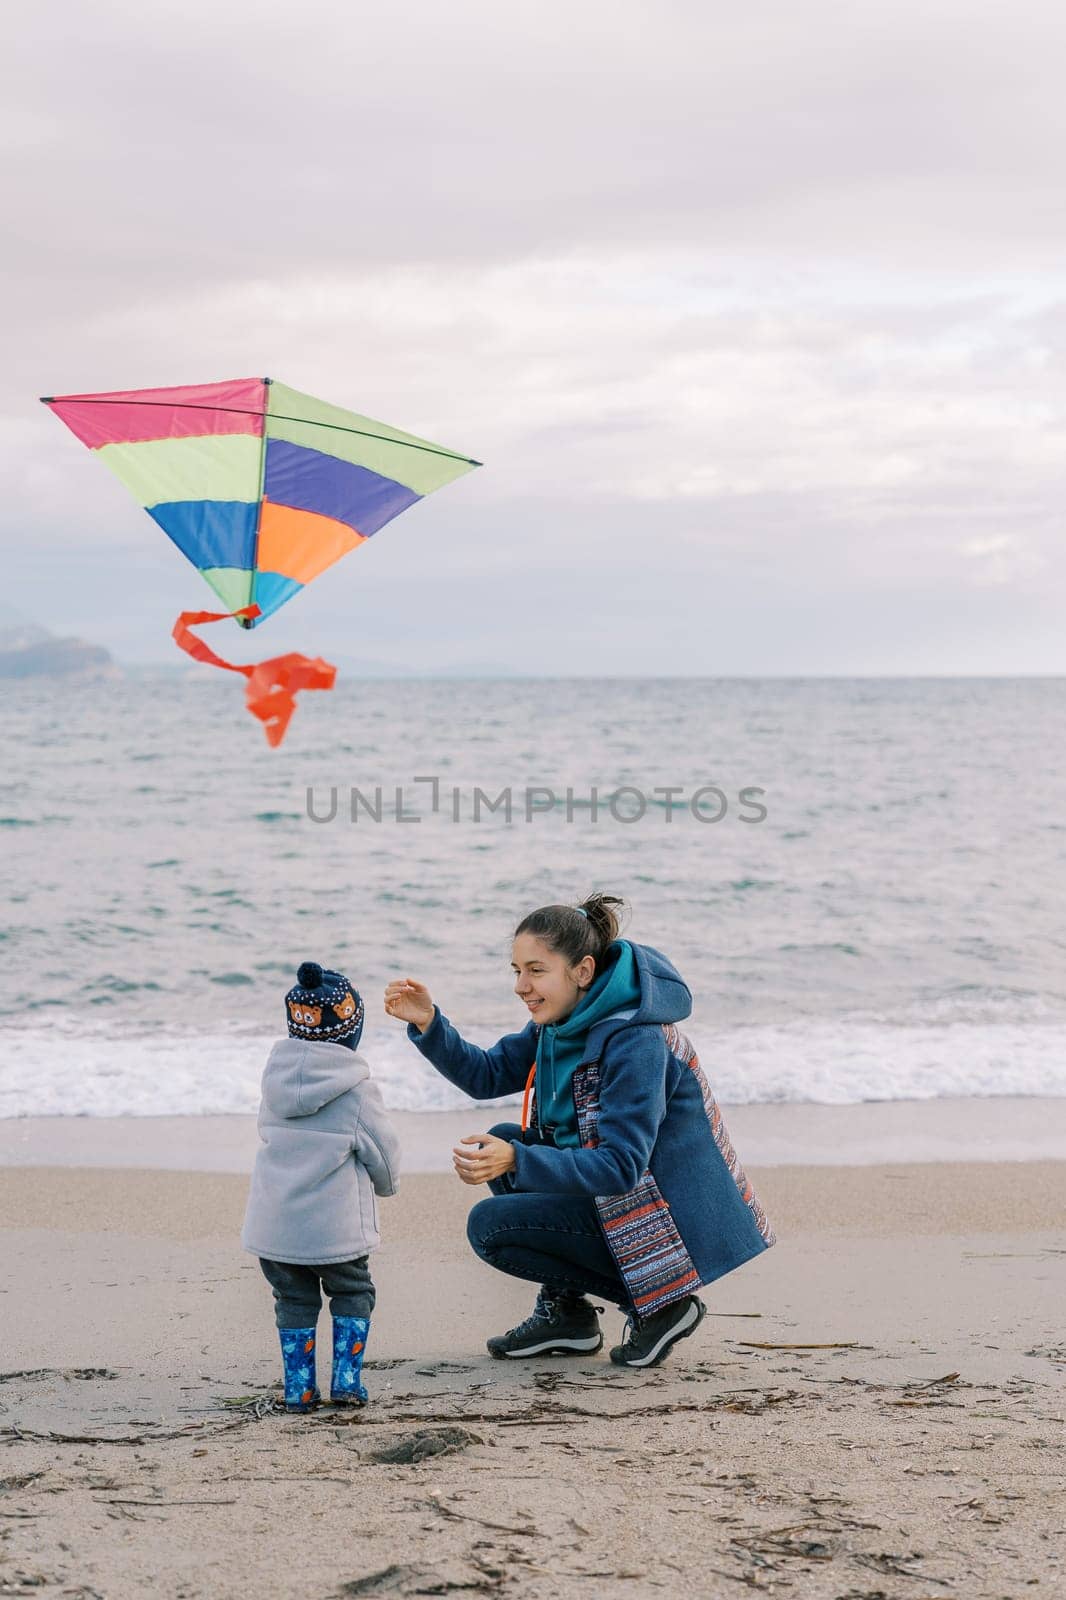 Mom crouched next to a little girl with a colorful kite in her hand near the sea. High quality photo